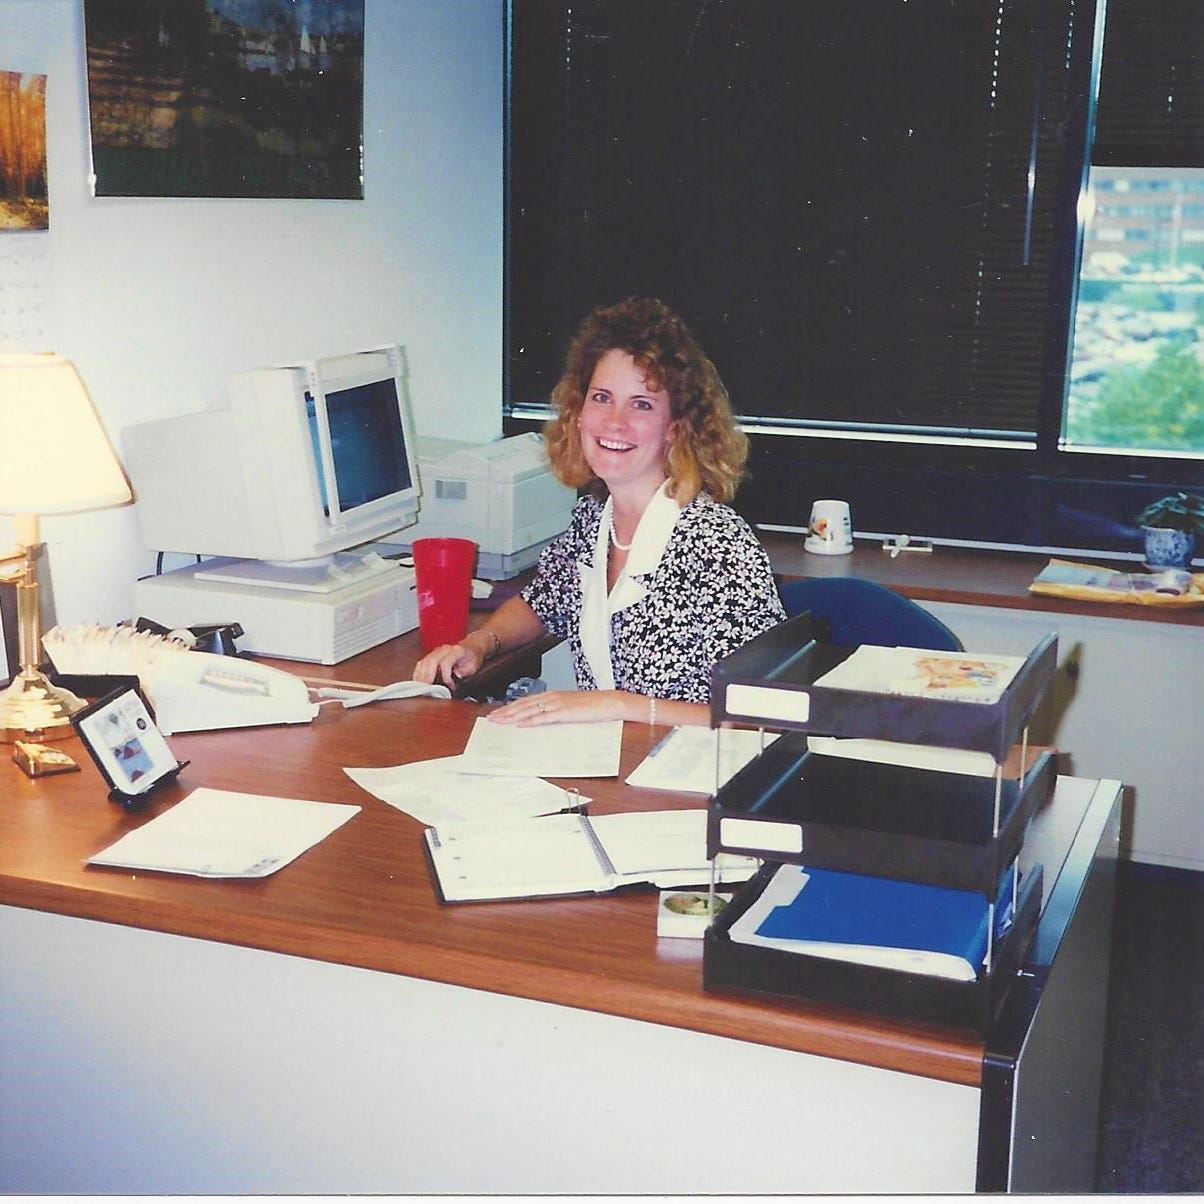 A 20-something woman sits behind a desk at work in a scene from the 1990s